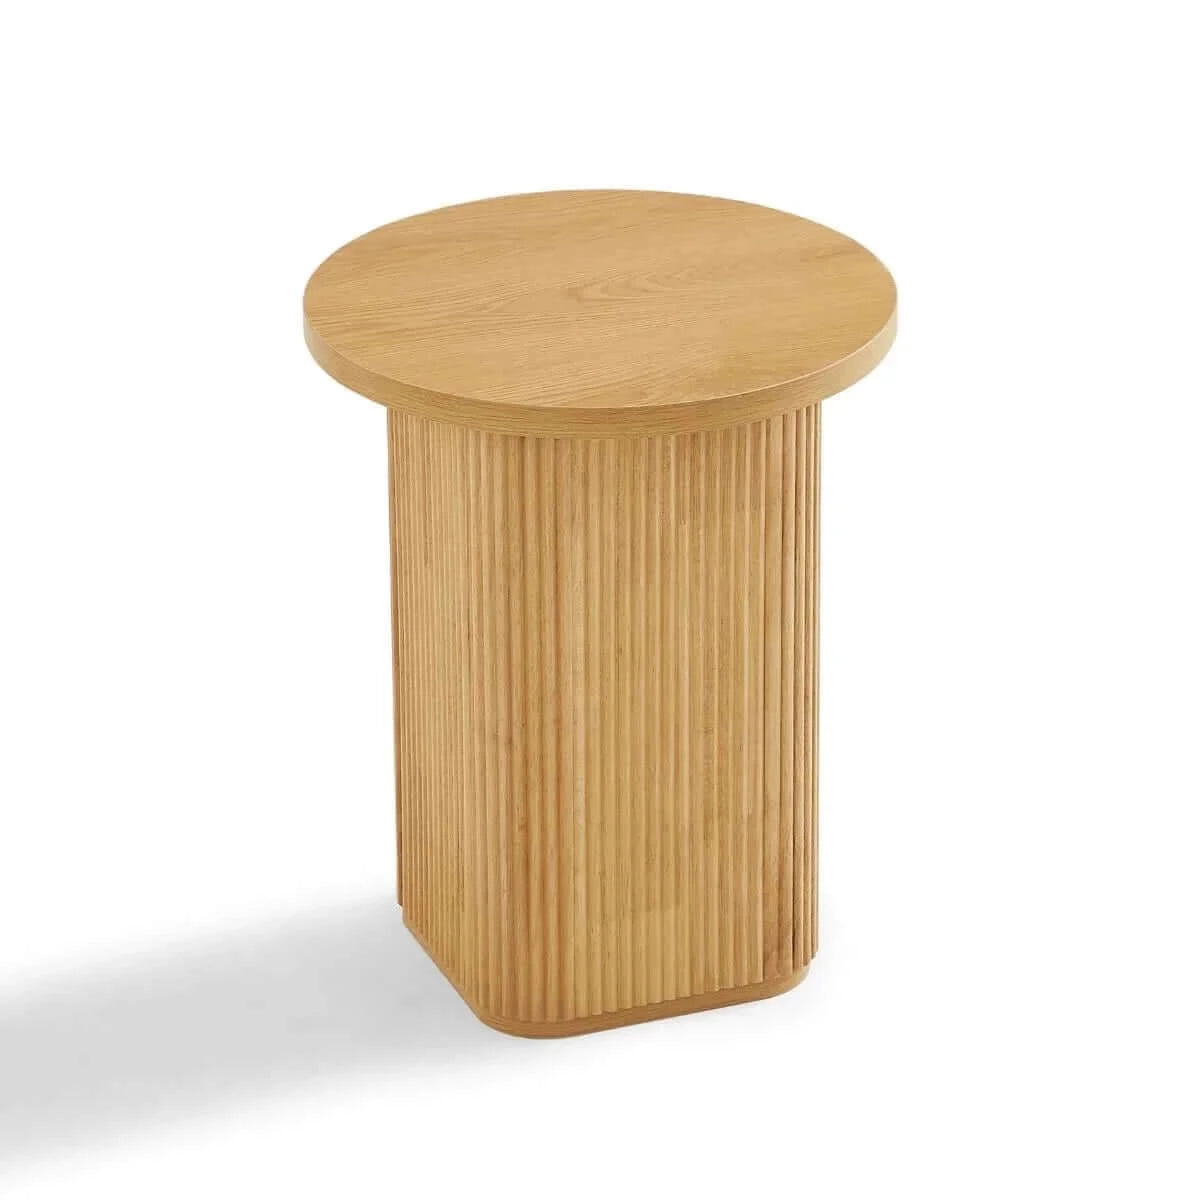 Buy kate round column side table in natural - upinteriors-Upinteriors